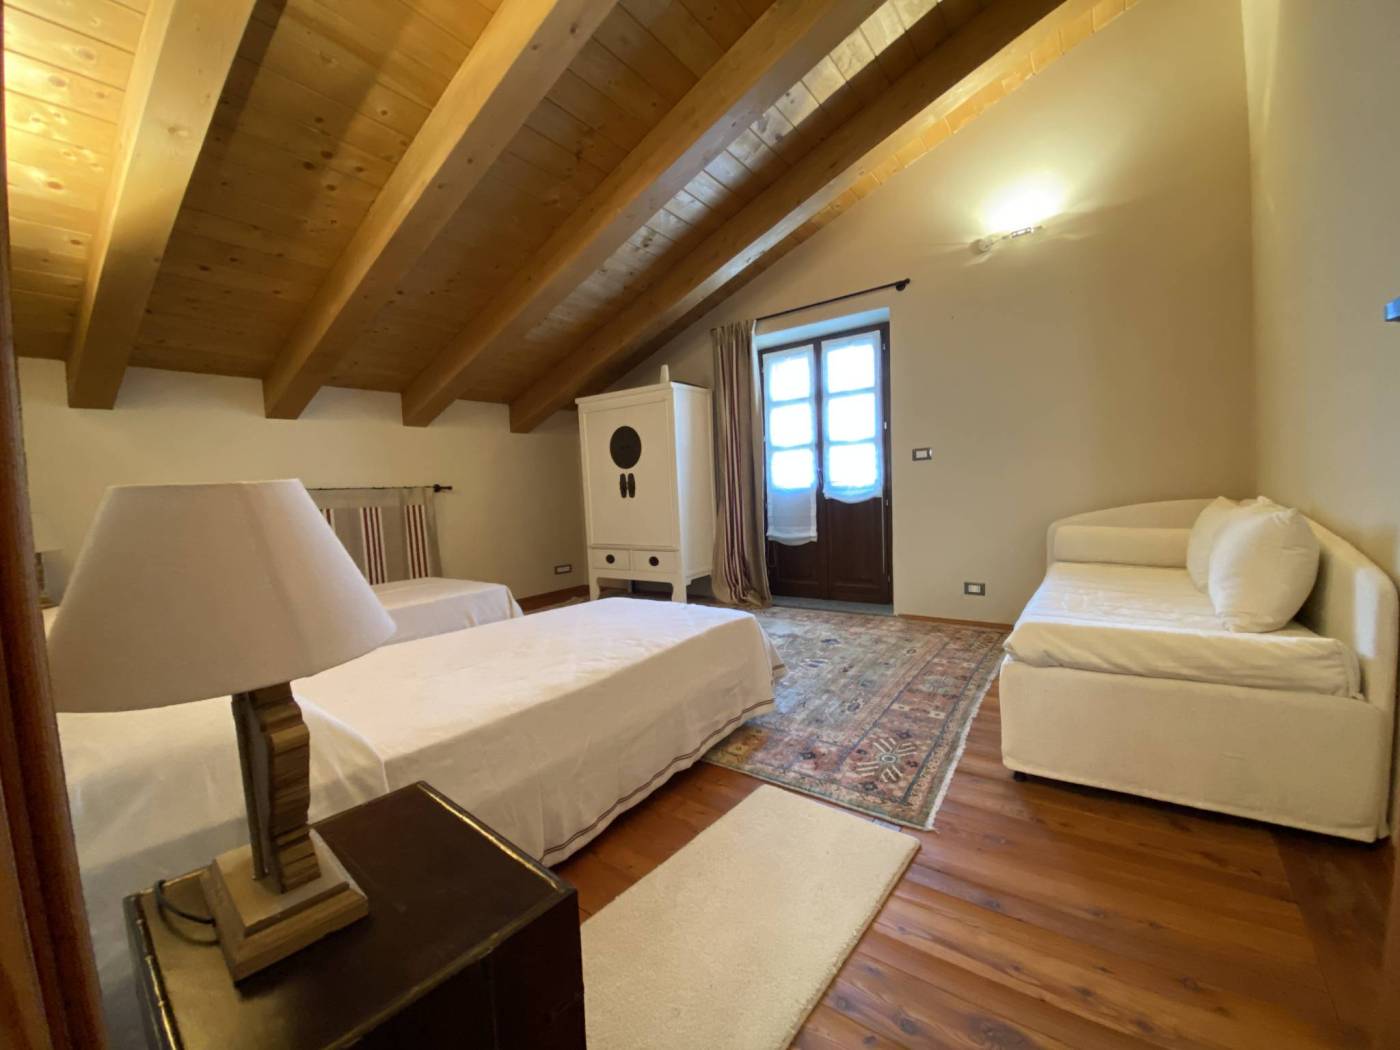 Bardonecchia in the heart of Borgo Vecchio n stable from the early 1900s we sell splendid apartment in excellent condition, on two levels 